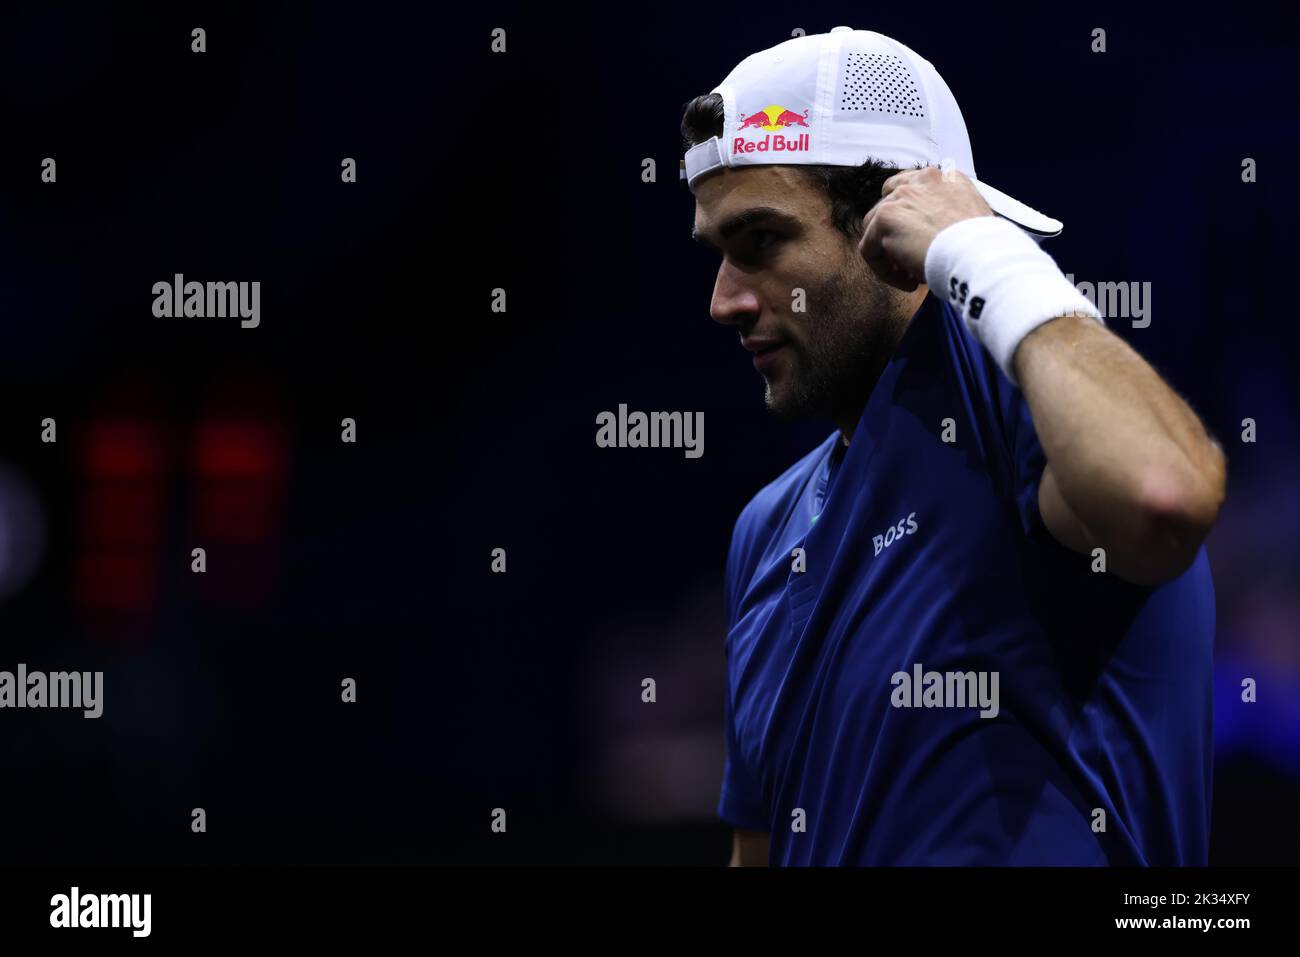 24th September 2022; O2, London England: Laver Cup international tennis tournament: Matteo Berrettini of Team Europe during his match with Felix Auger-Aliassime of Team World Stock Photo